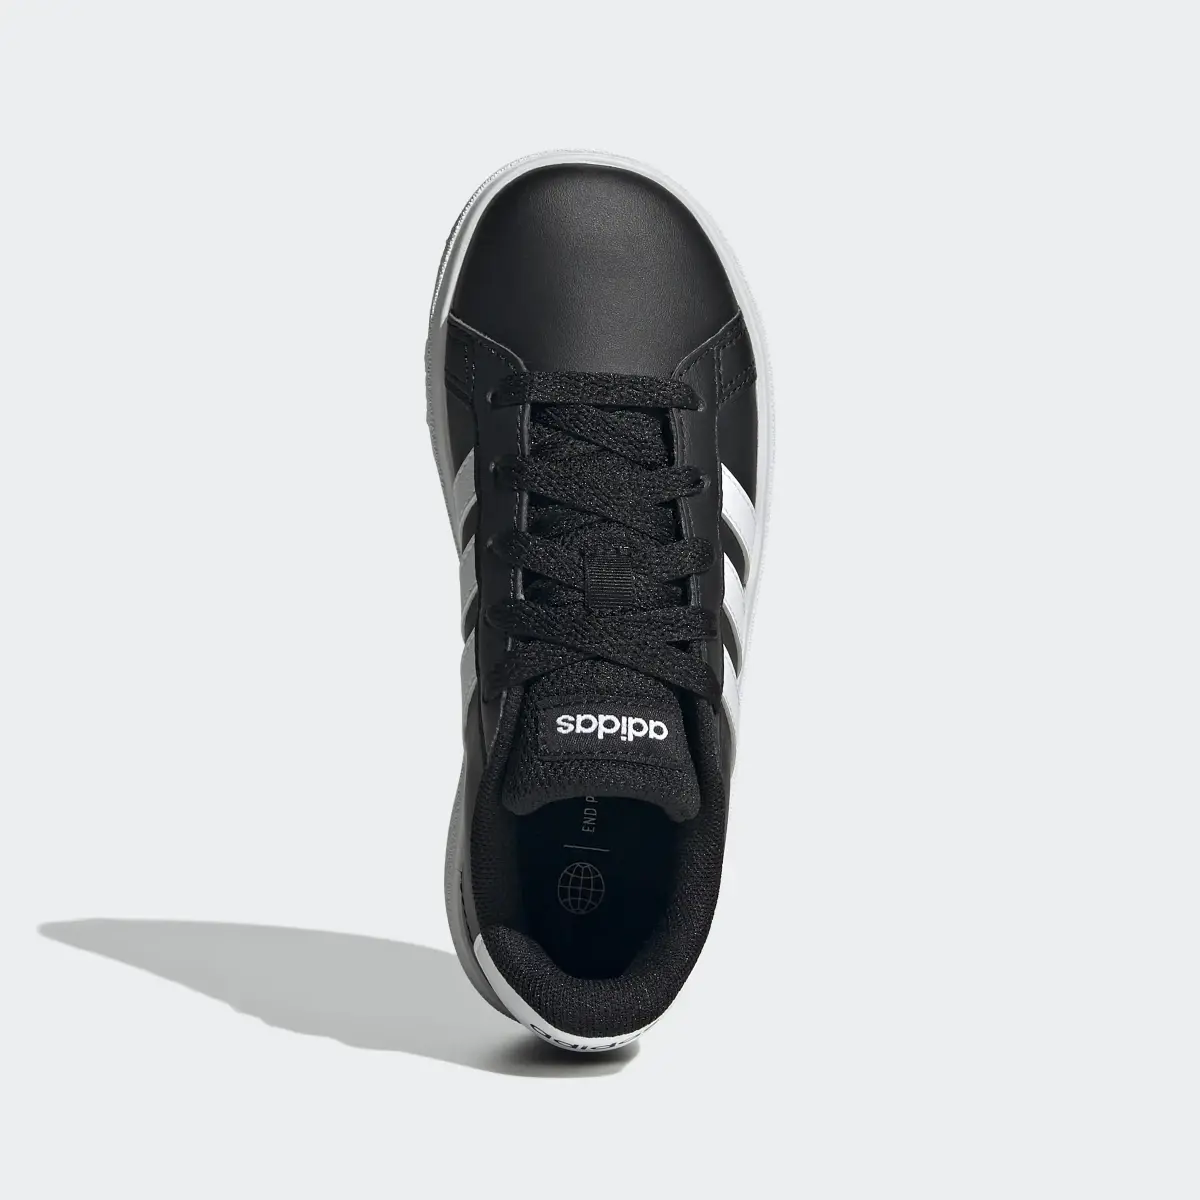 Adidas Grand Court Lace-Up Shoes. 3